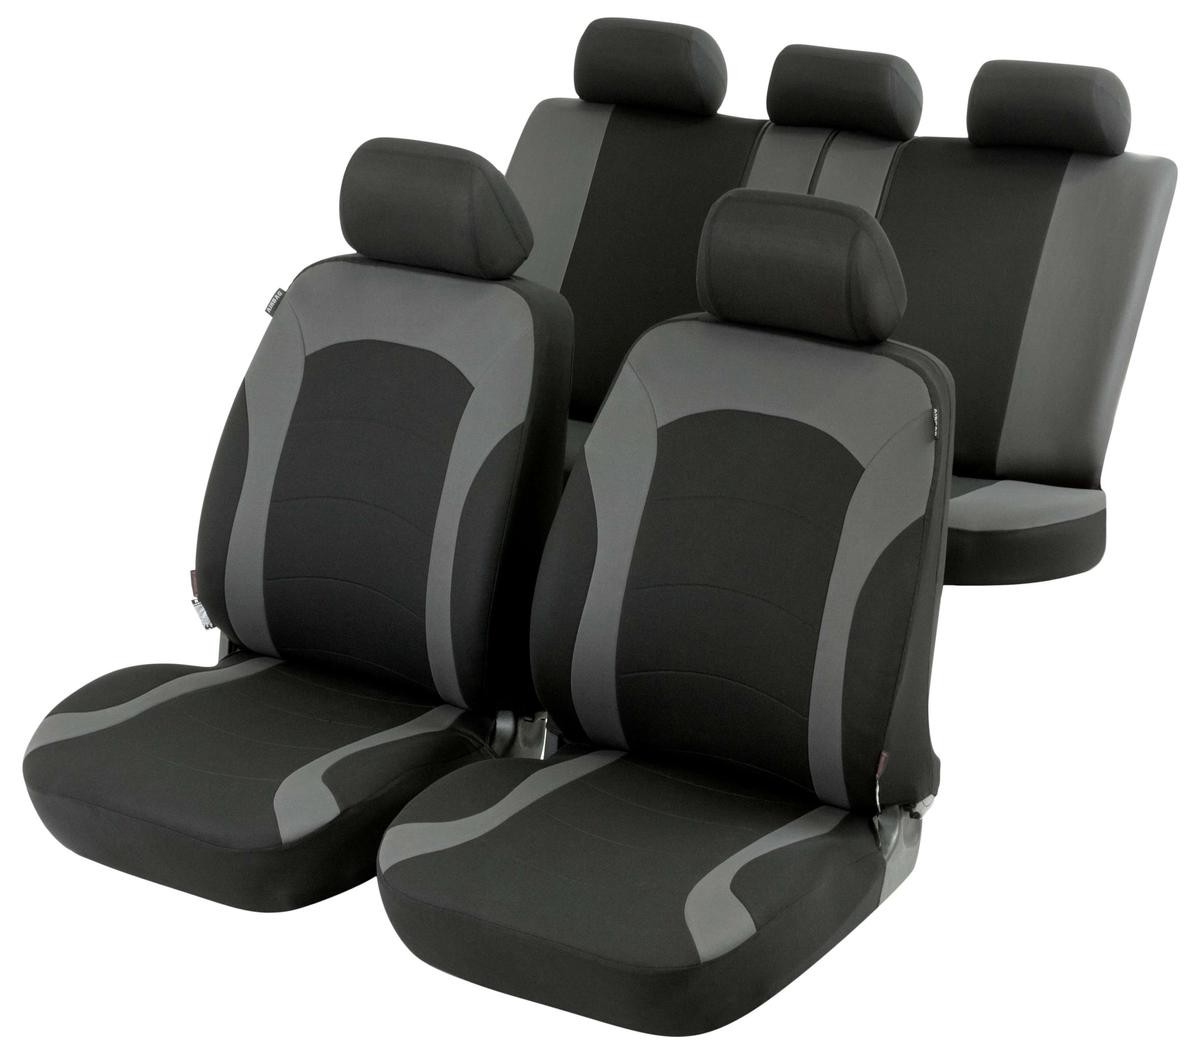 WALSER 11786 Auto seat covers VW Golf 5 (1K1) black/grey, Polyester, Front and Rear